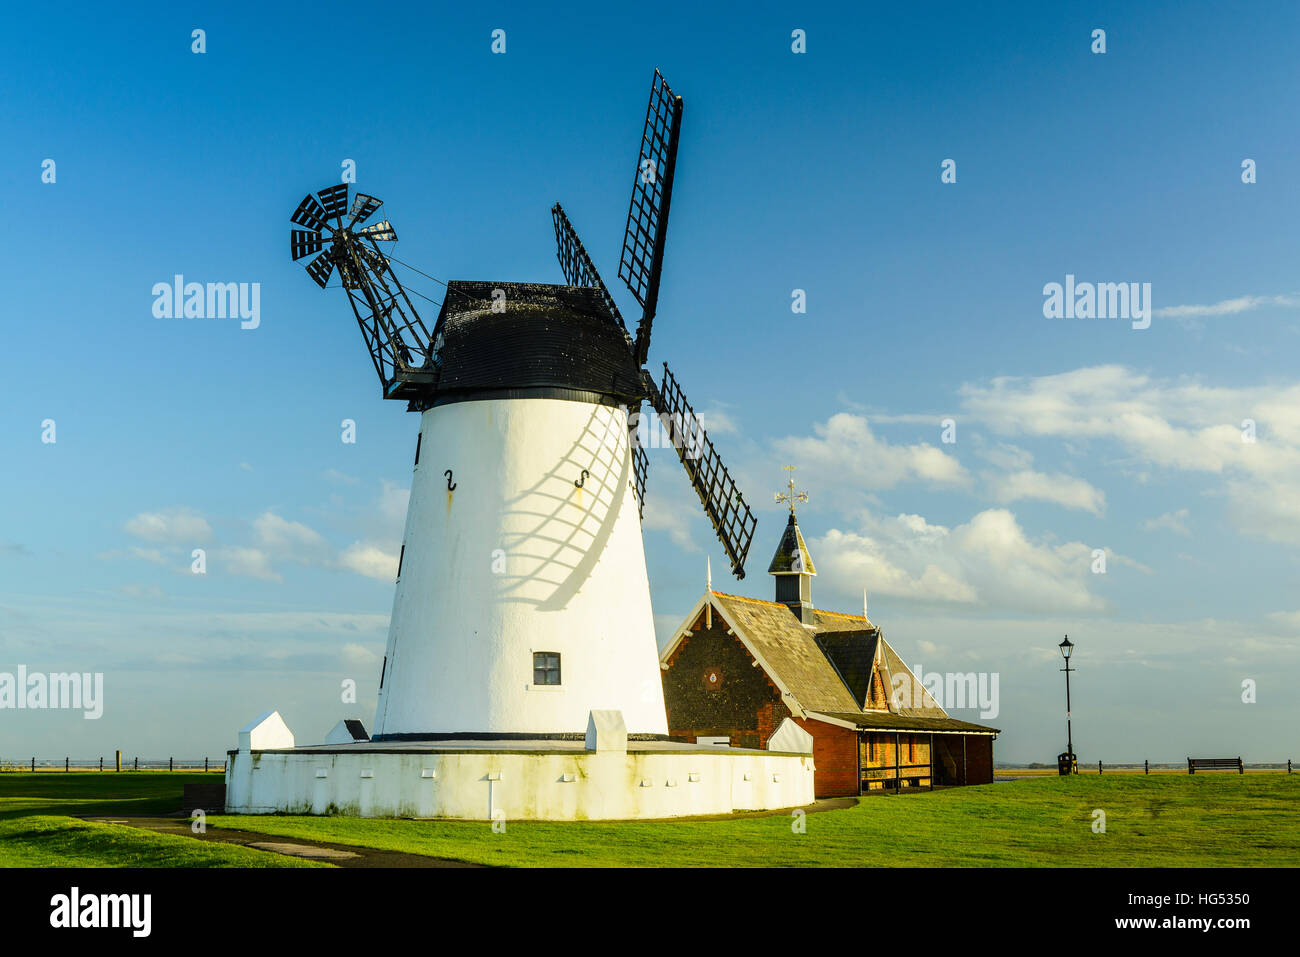 The Windmill and Old Lifeboat House iconic landmarks on the Green at Lytham Lancashire England Stock Photo